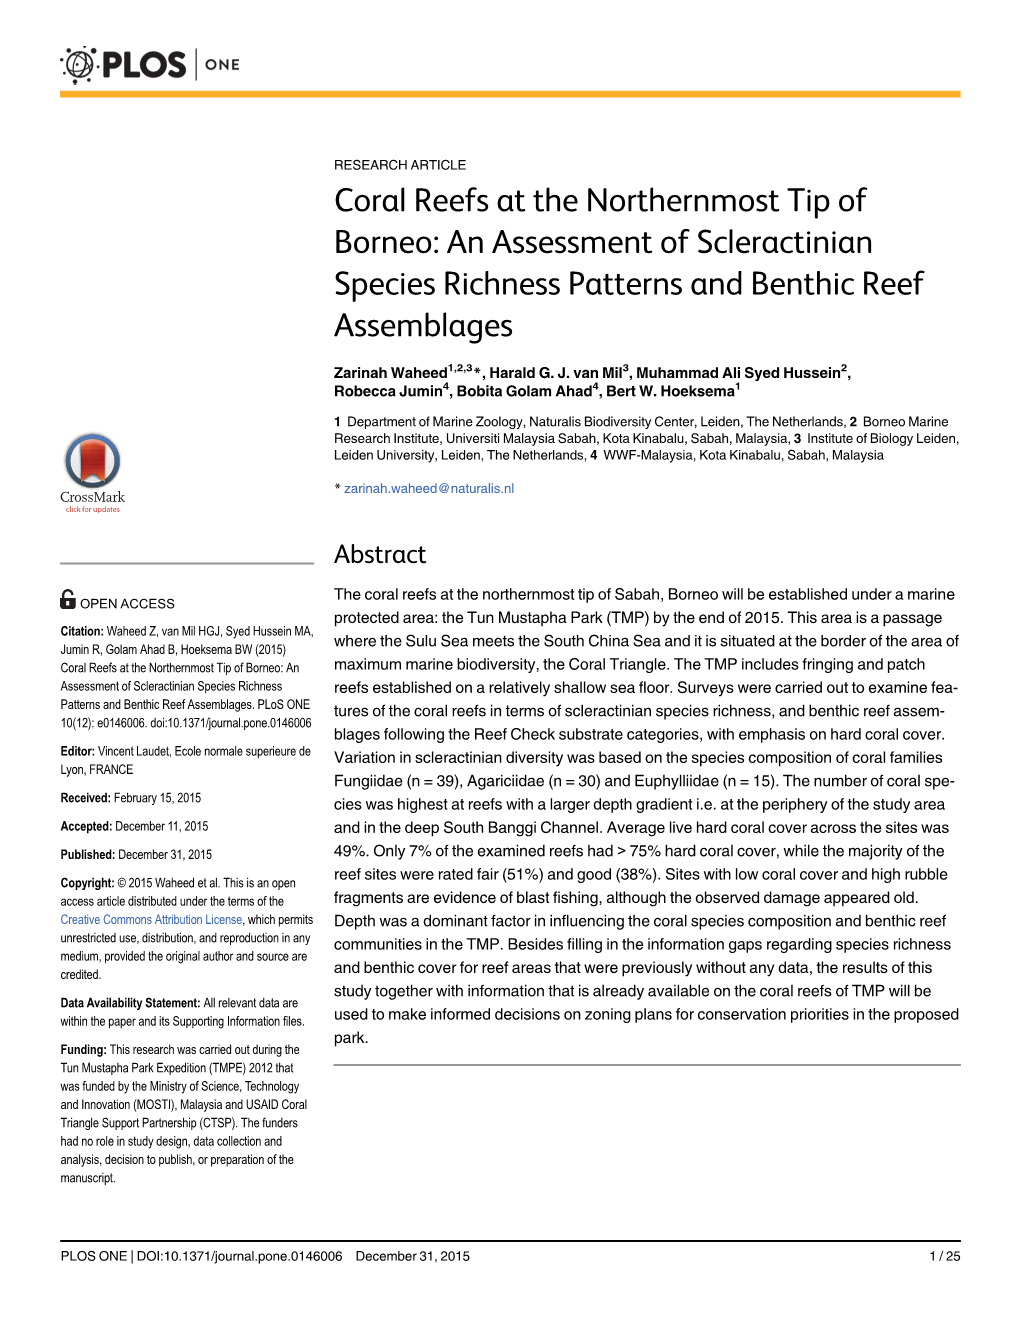 Coral Reefs at the Northernmost Tip of Borneo: an Assessment of Scleractinian Species Richness Patterns and Benthic Reef Assemblages